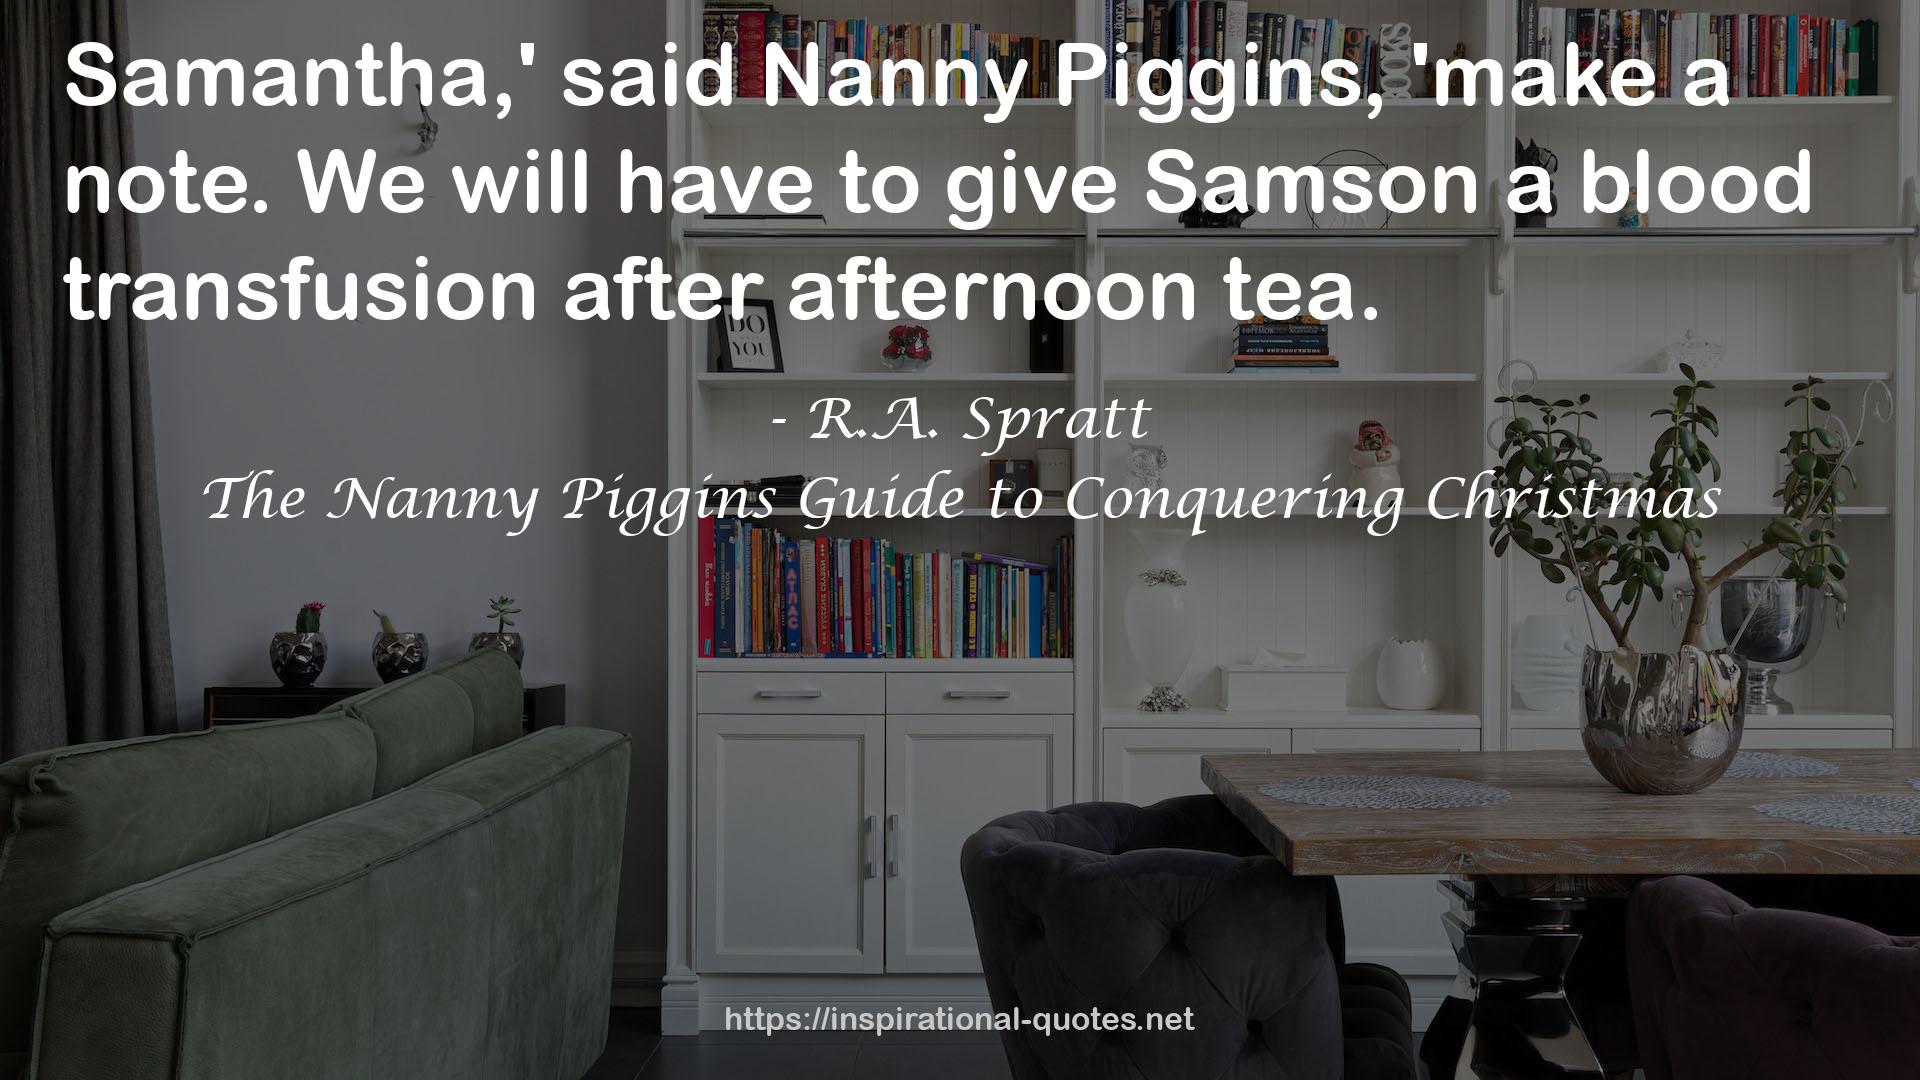 The Nanny Piggins Guide to Conquering Christmas QUOTES